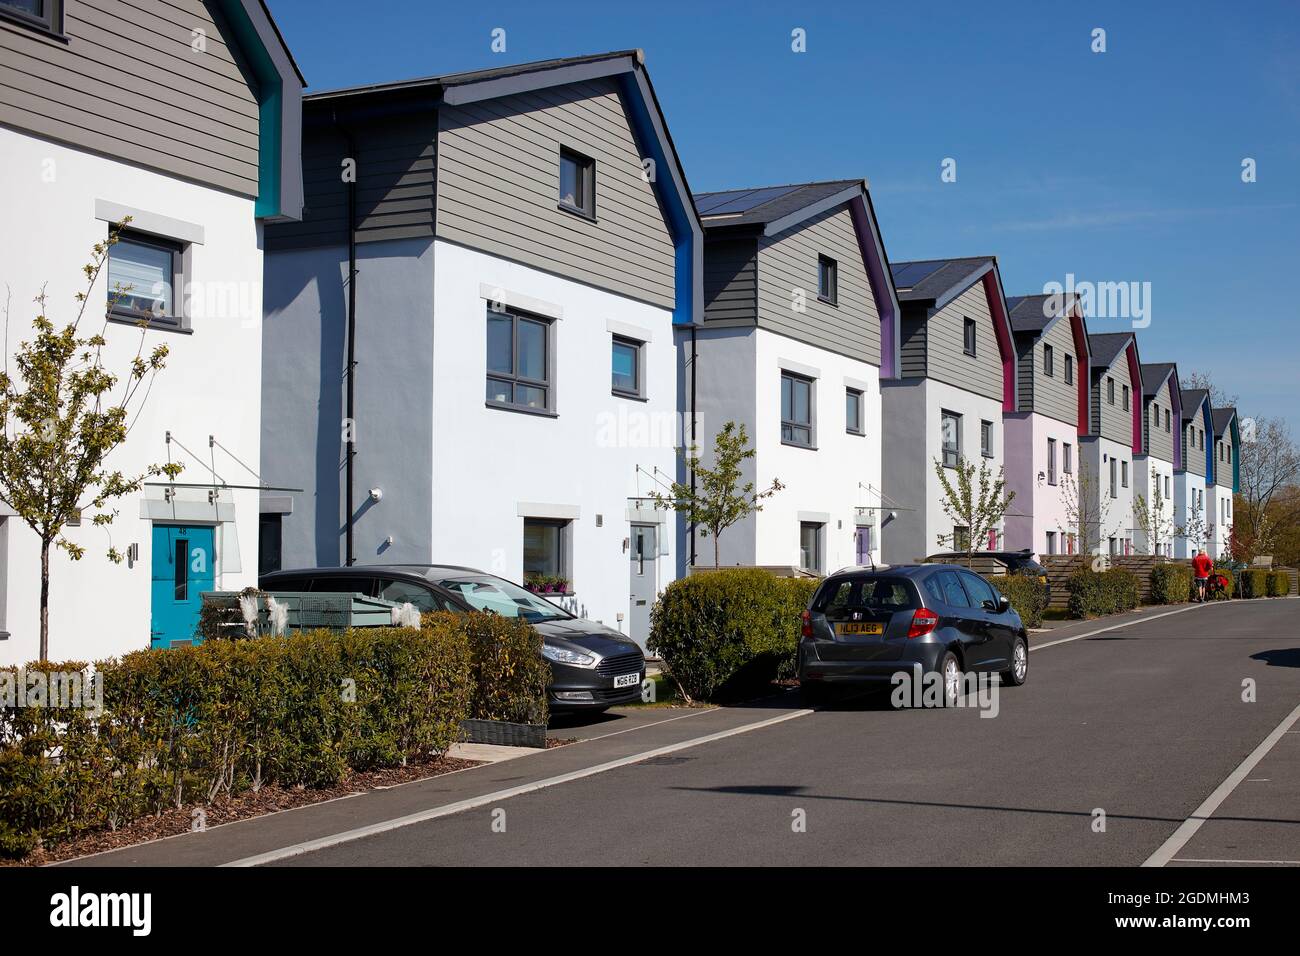 Newer Eco friendly homes in a small development in Roborough near Plymouth in the UK.  Homes have solar panels and high thermal efficiency. Stock Photo